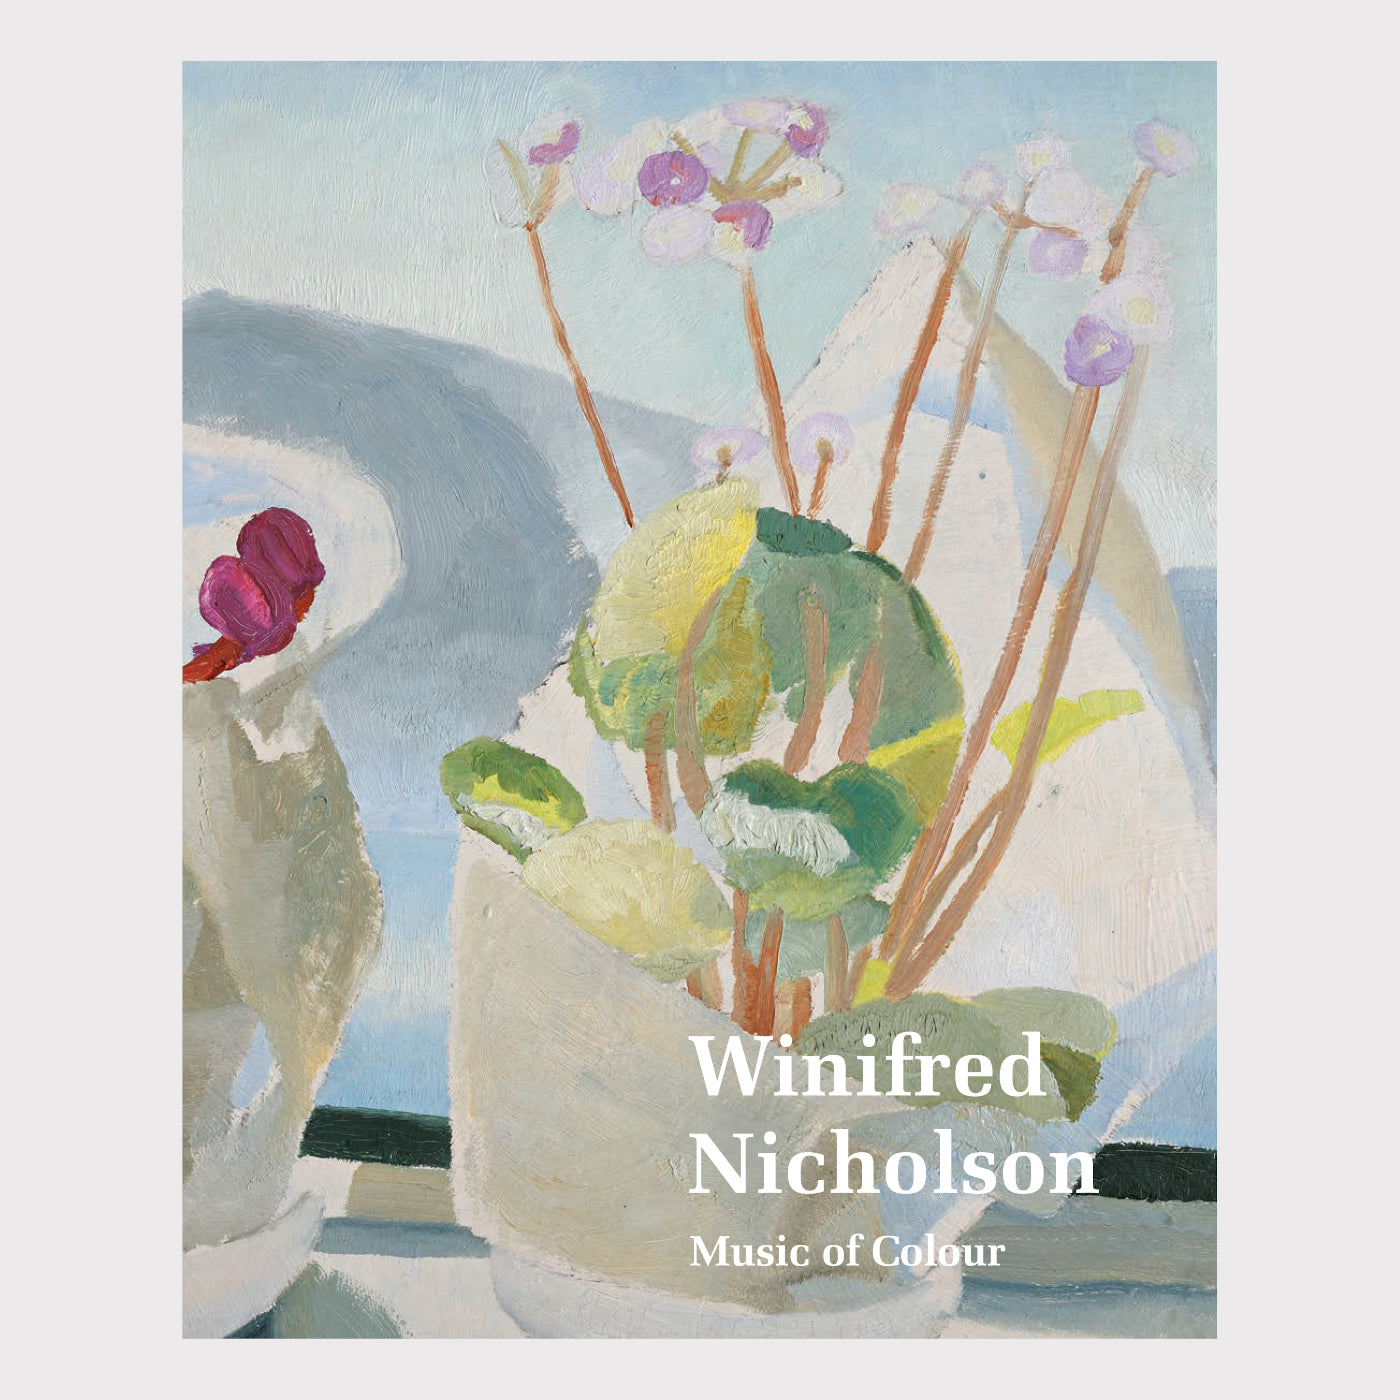 Winifred Nicholson: The Music of Colour